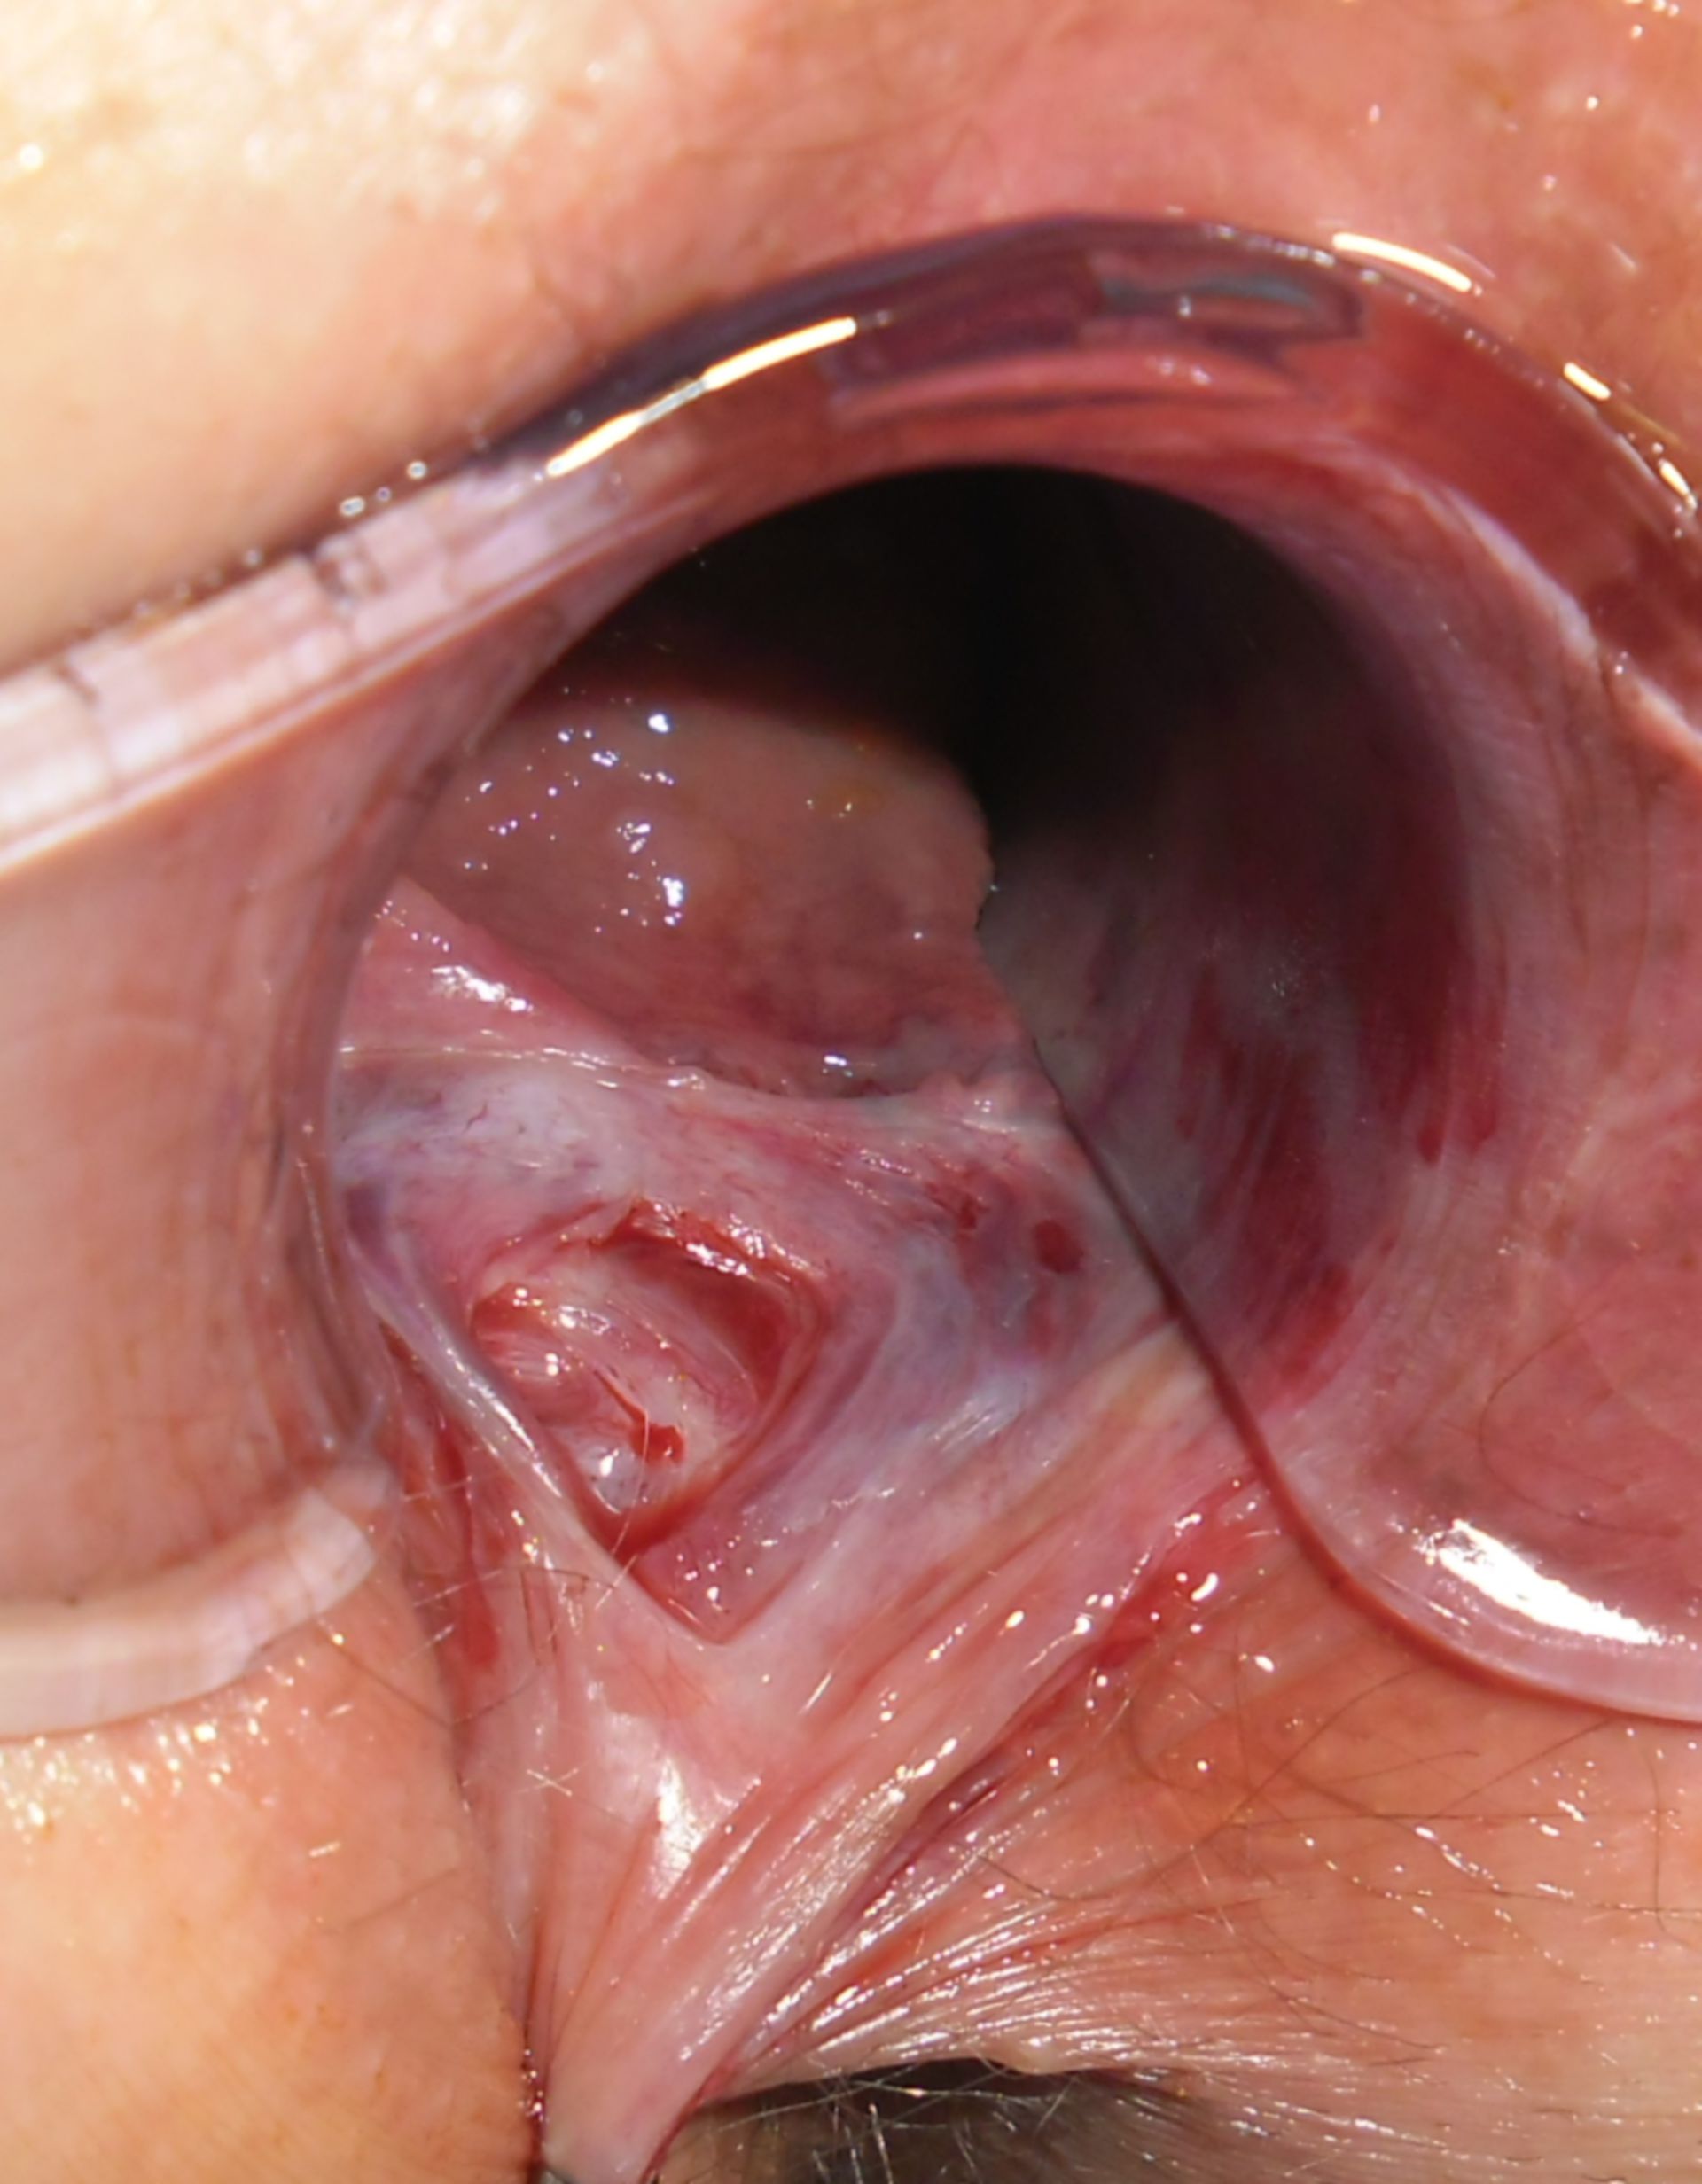 A Case Of Anal Fissure.